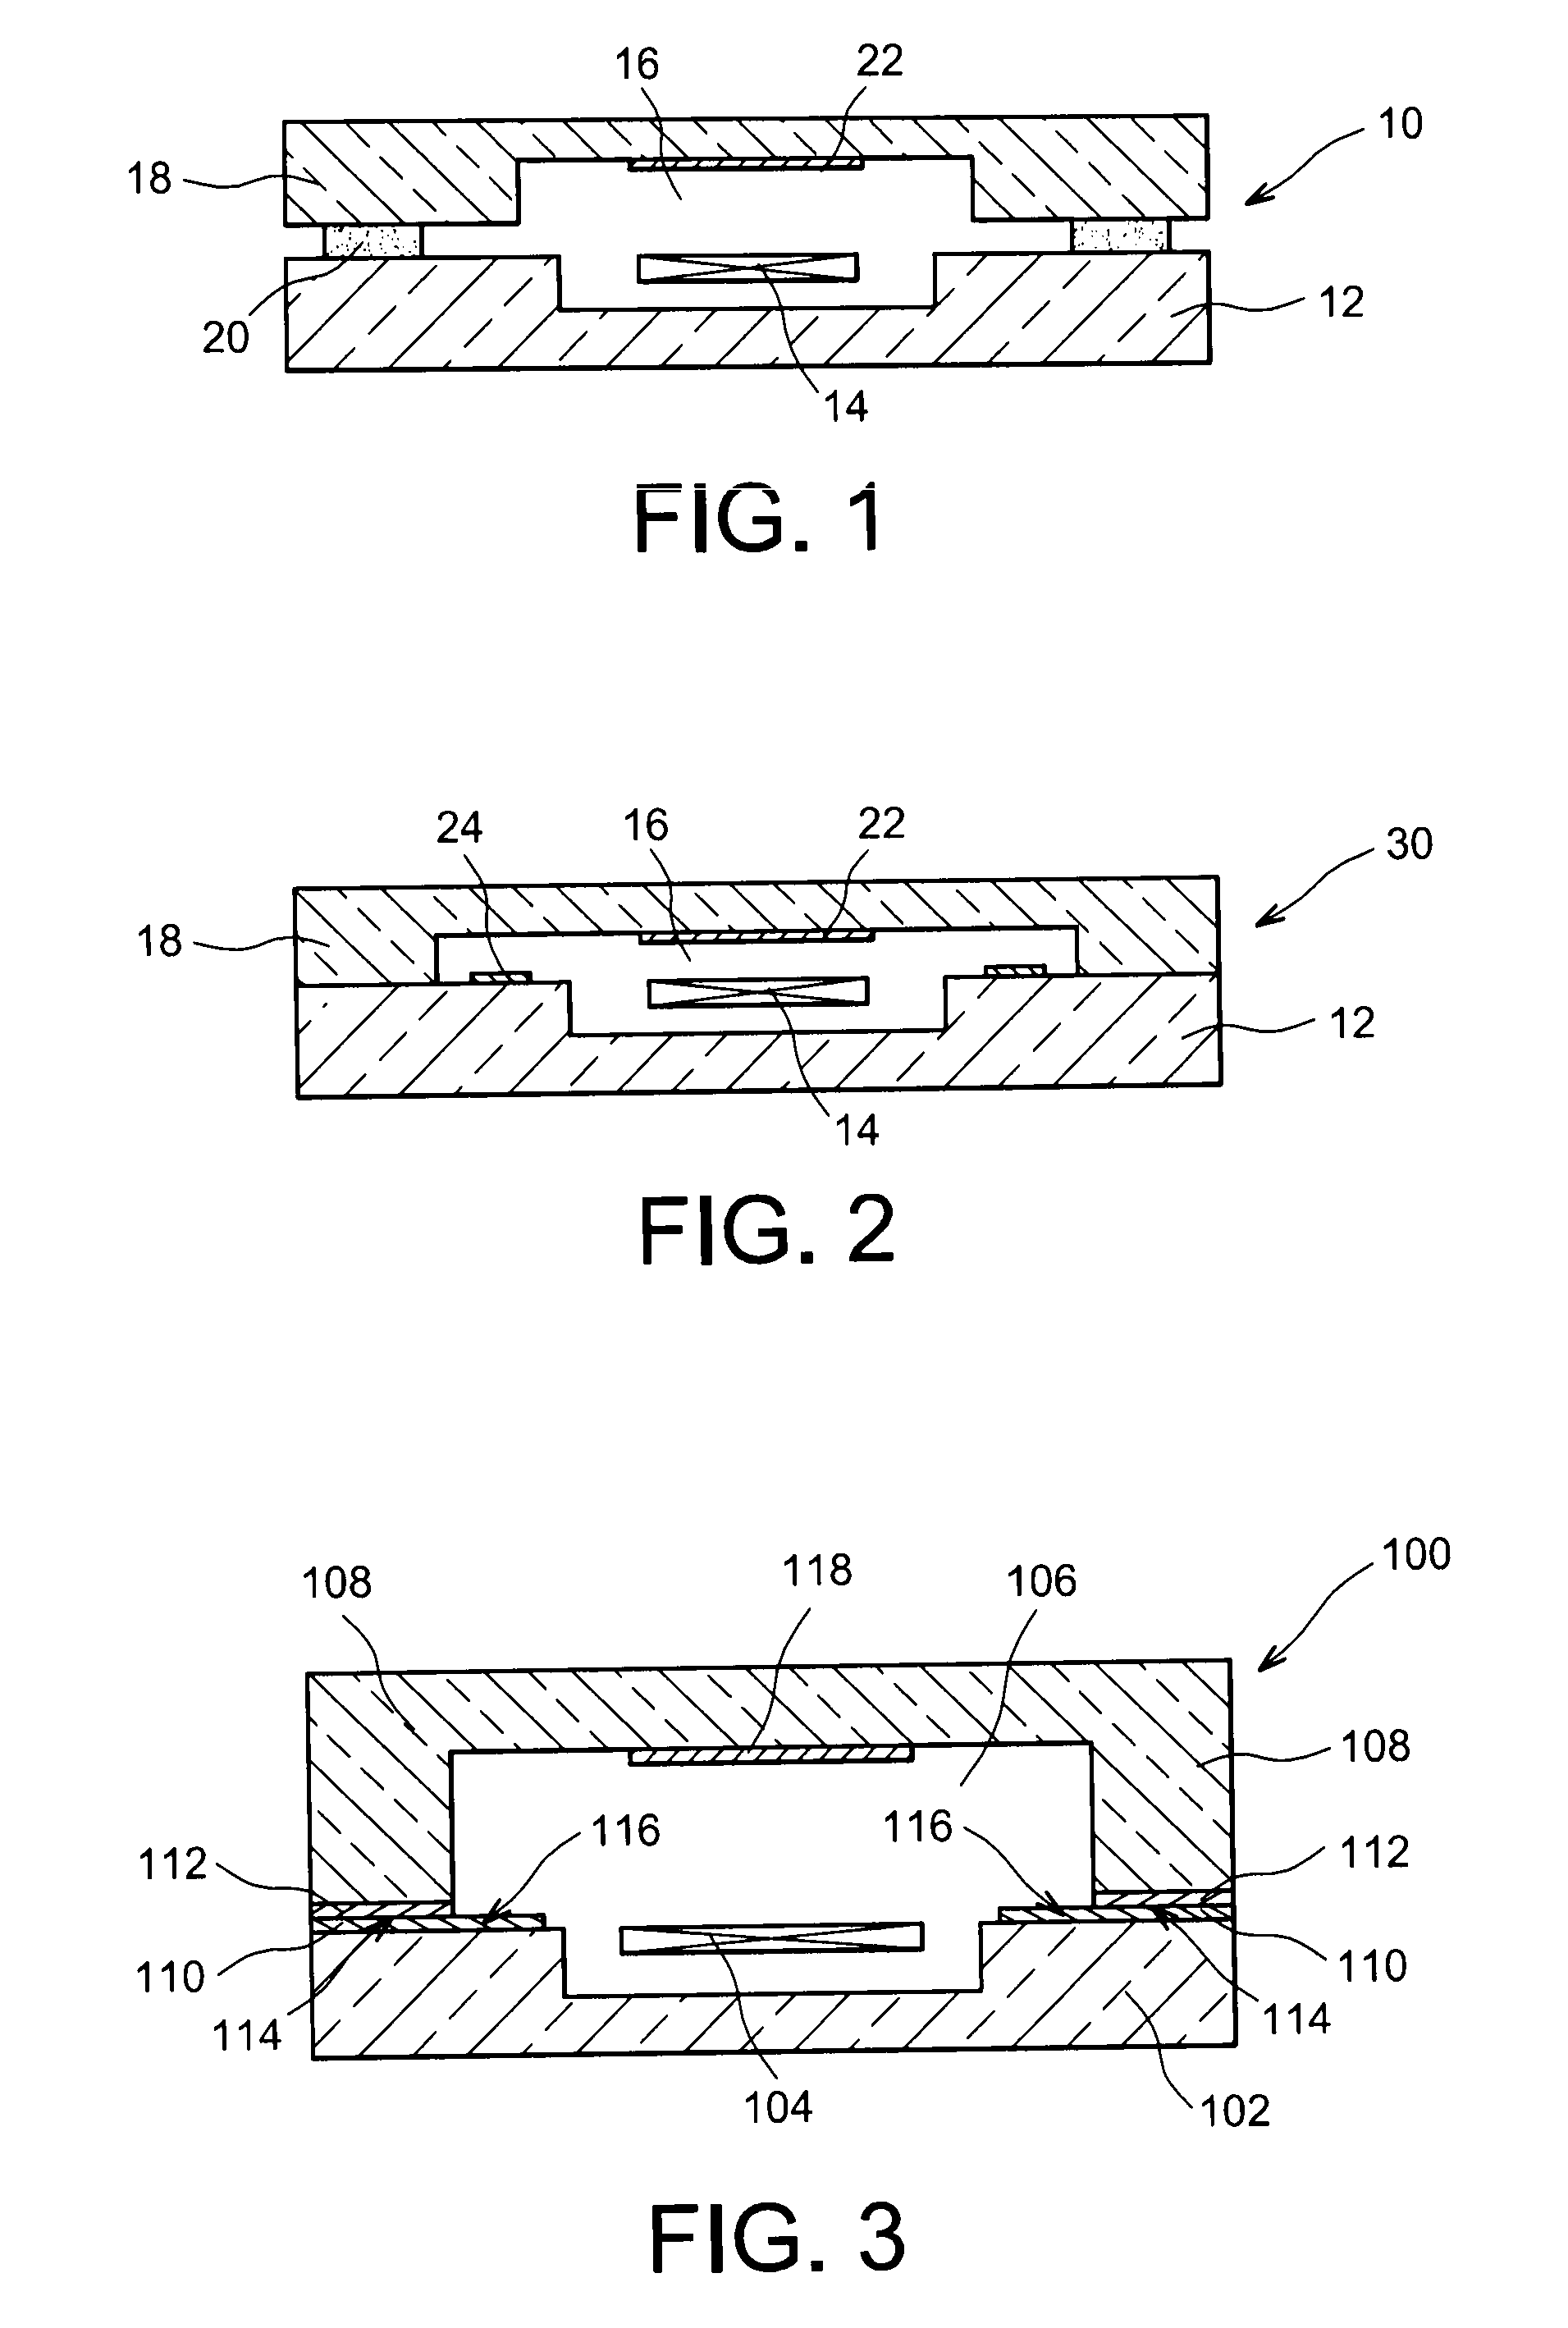 Cavity structure comprising an adhesion interface composed of getter material